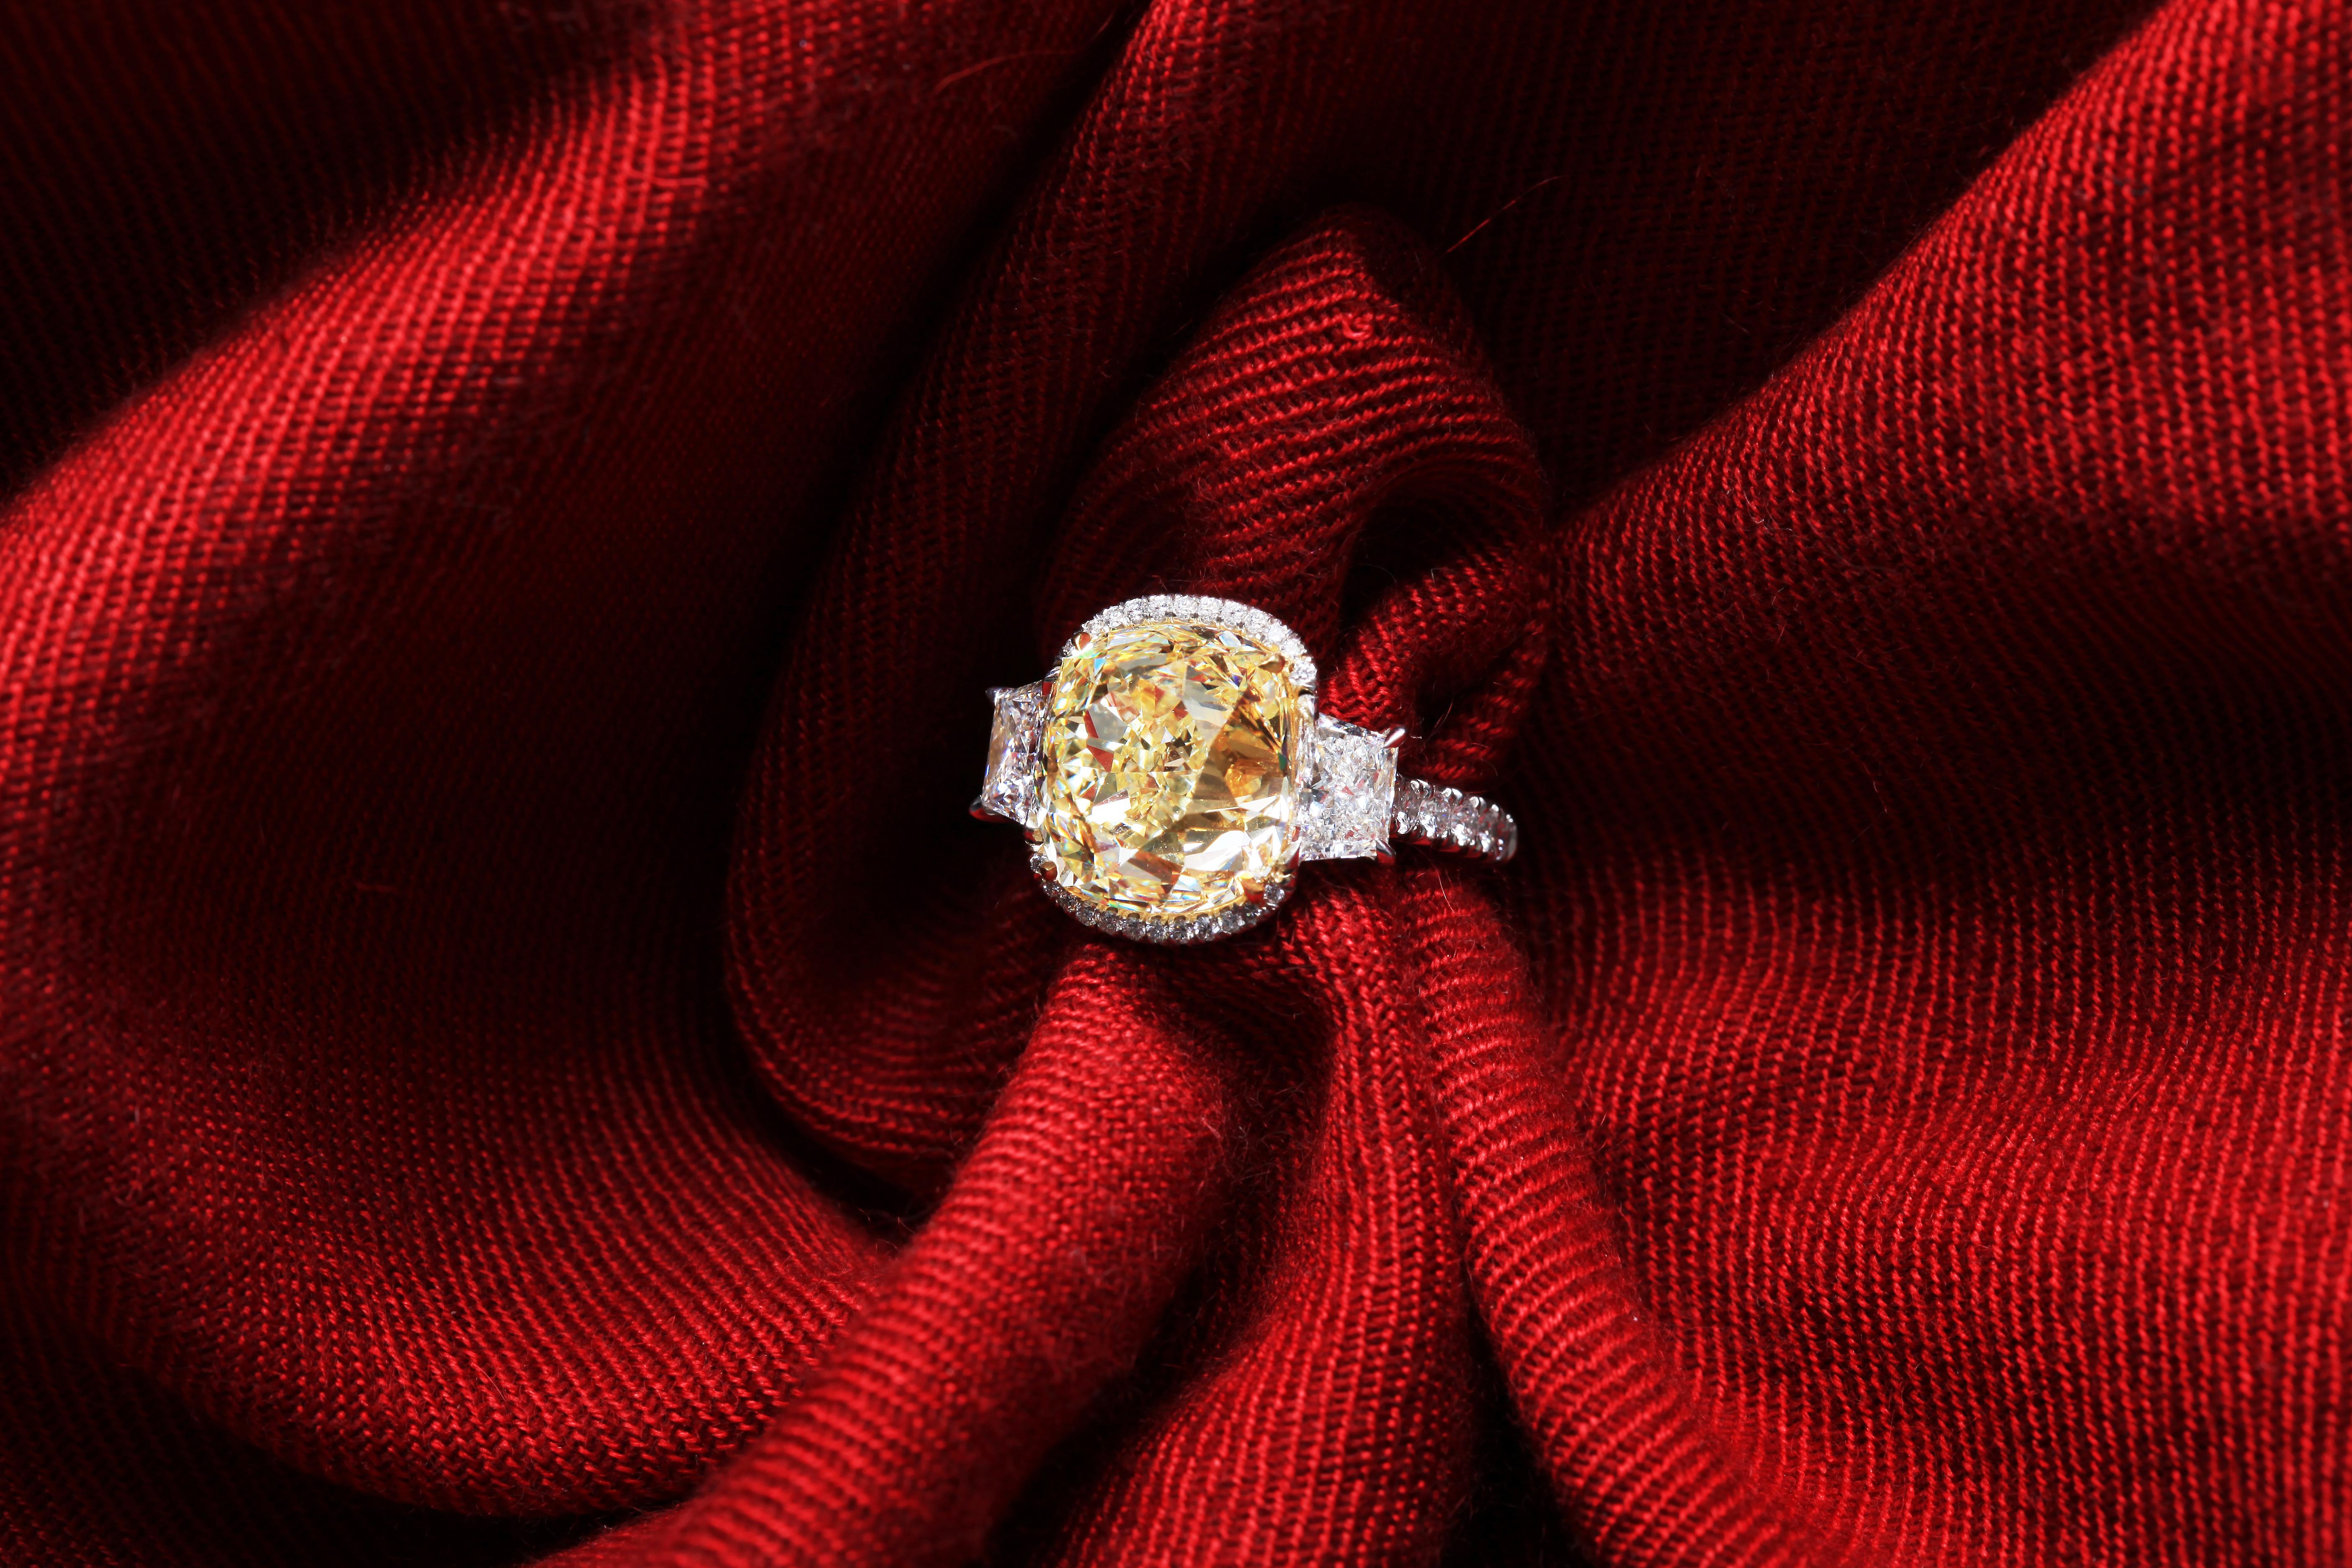 Contemporary Ethonica GIA Certified Old Cut Fancy Yellow Cushion Diamond Ring in Platinum